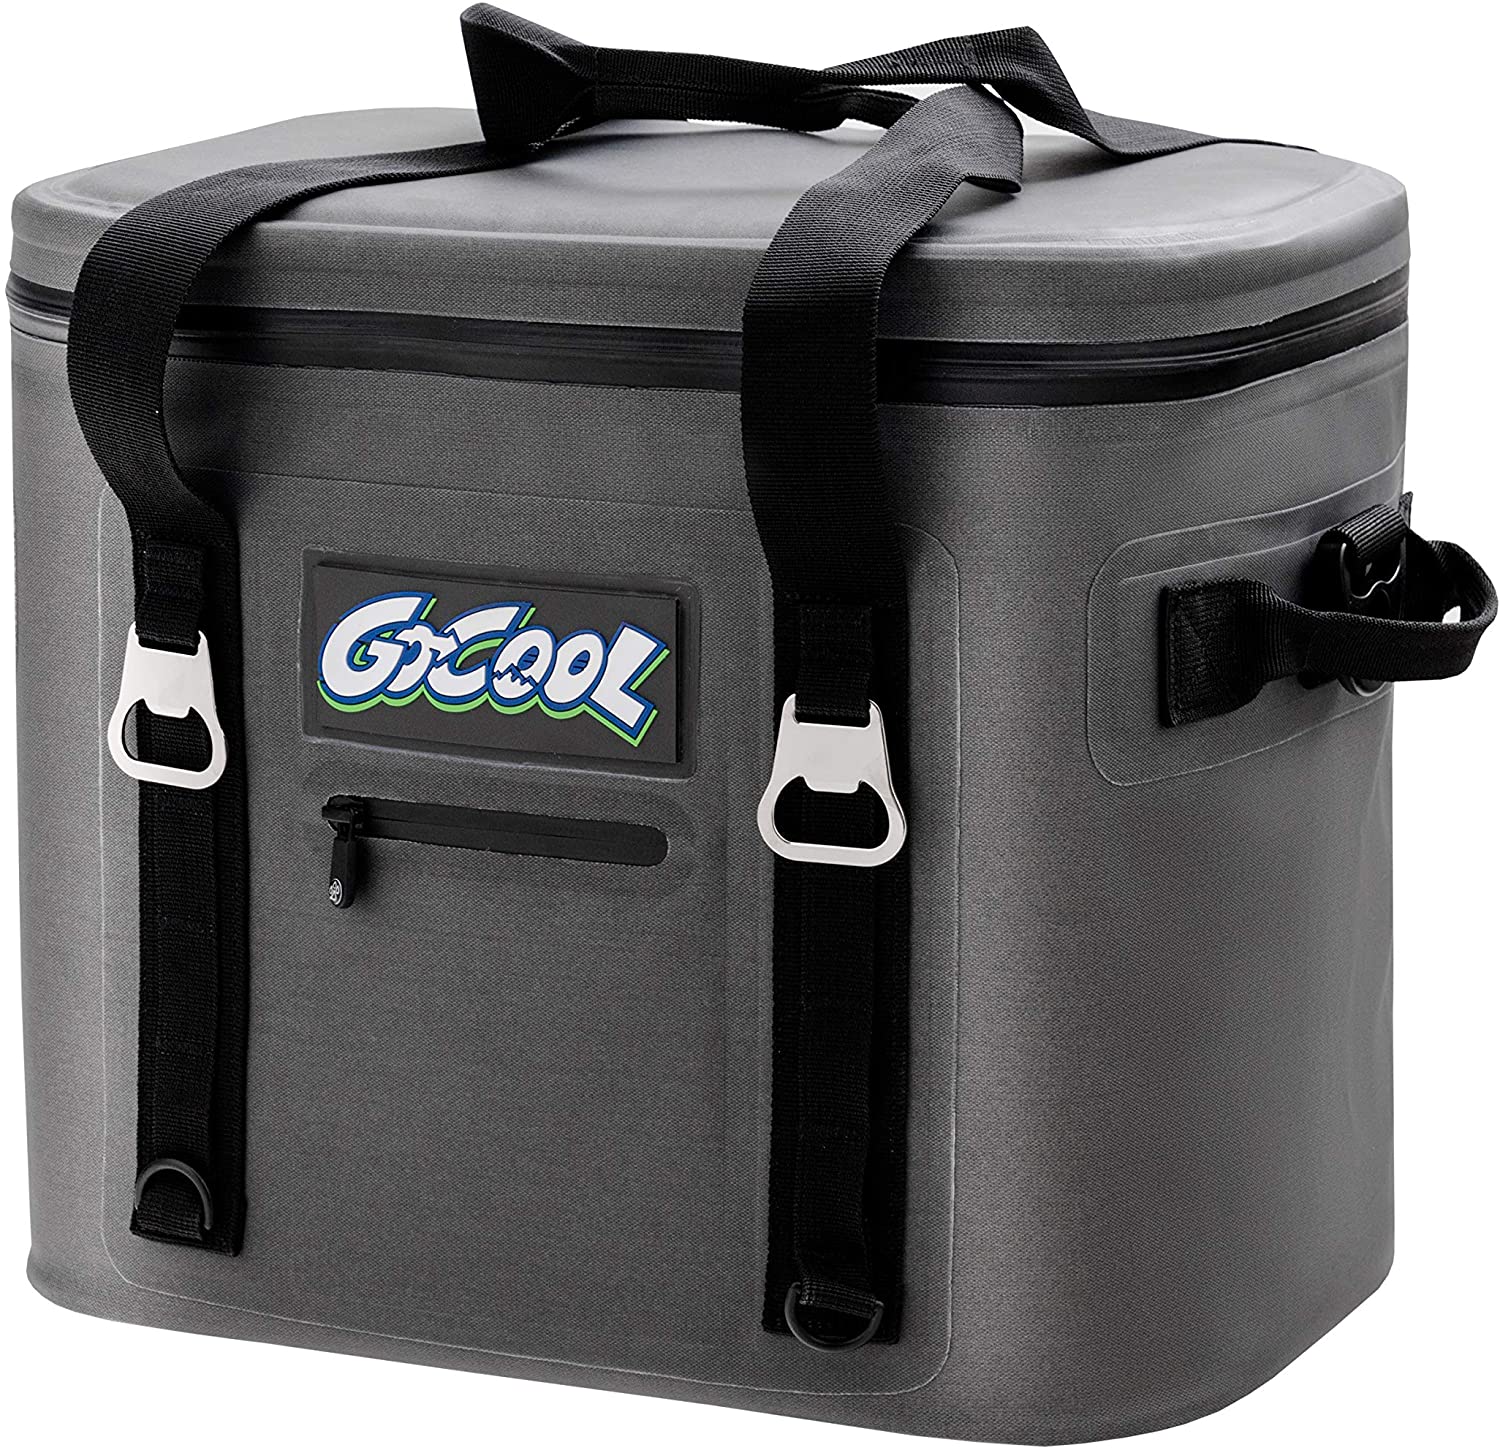 Giantex 24 Can Soft Pack Cooler Insulated Soft Sided Cooler Bag (24 Cans)